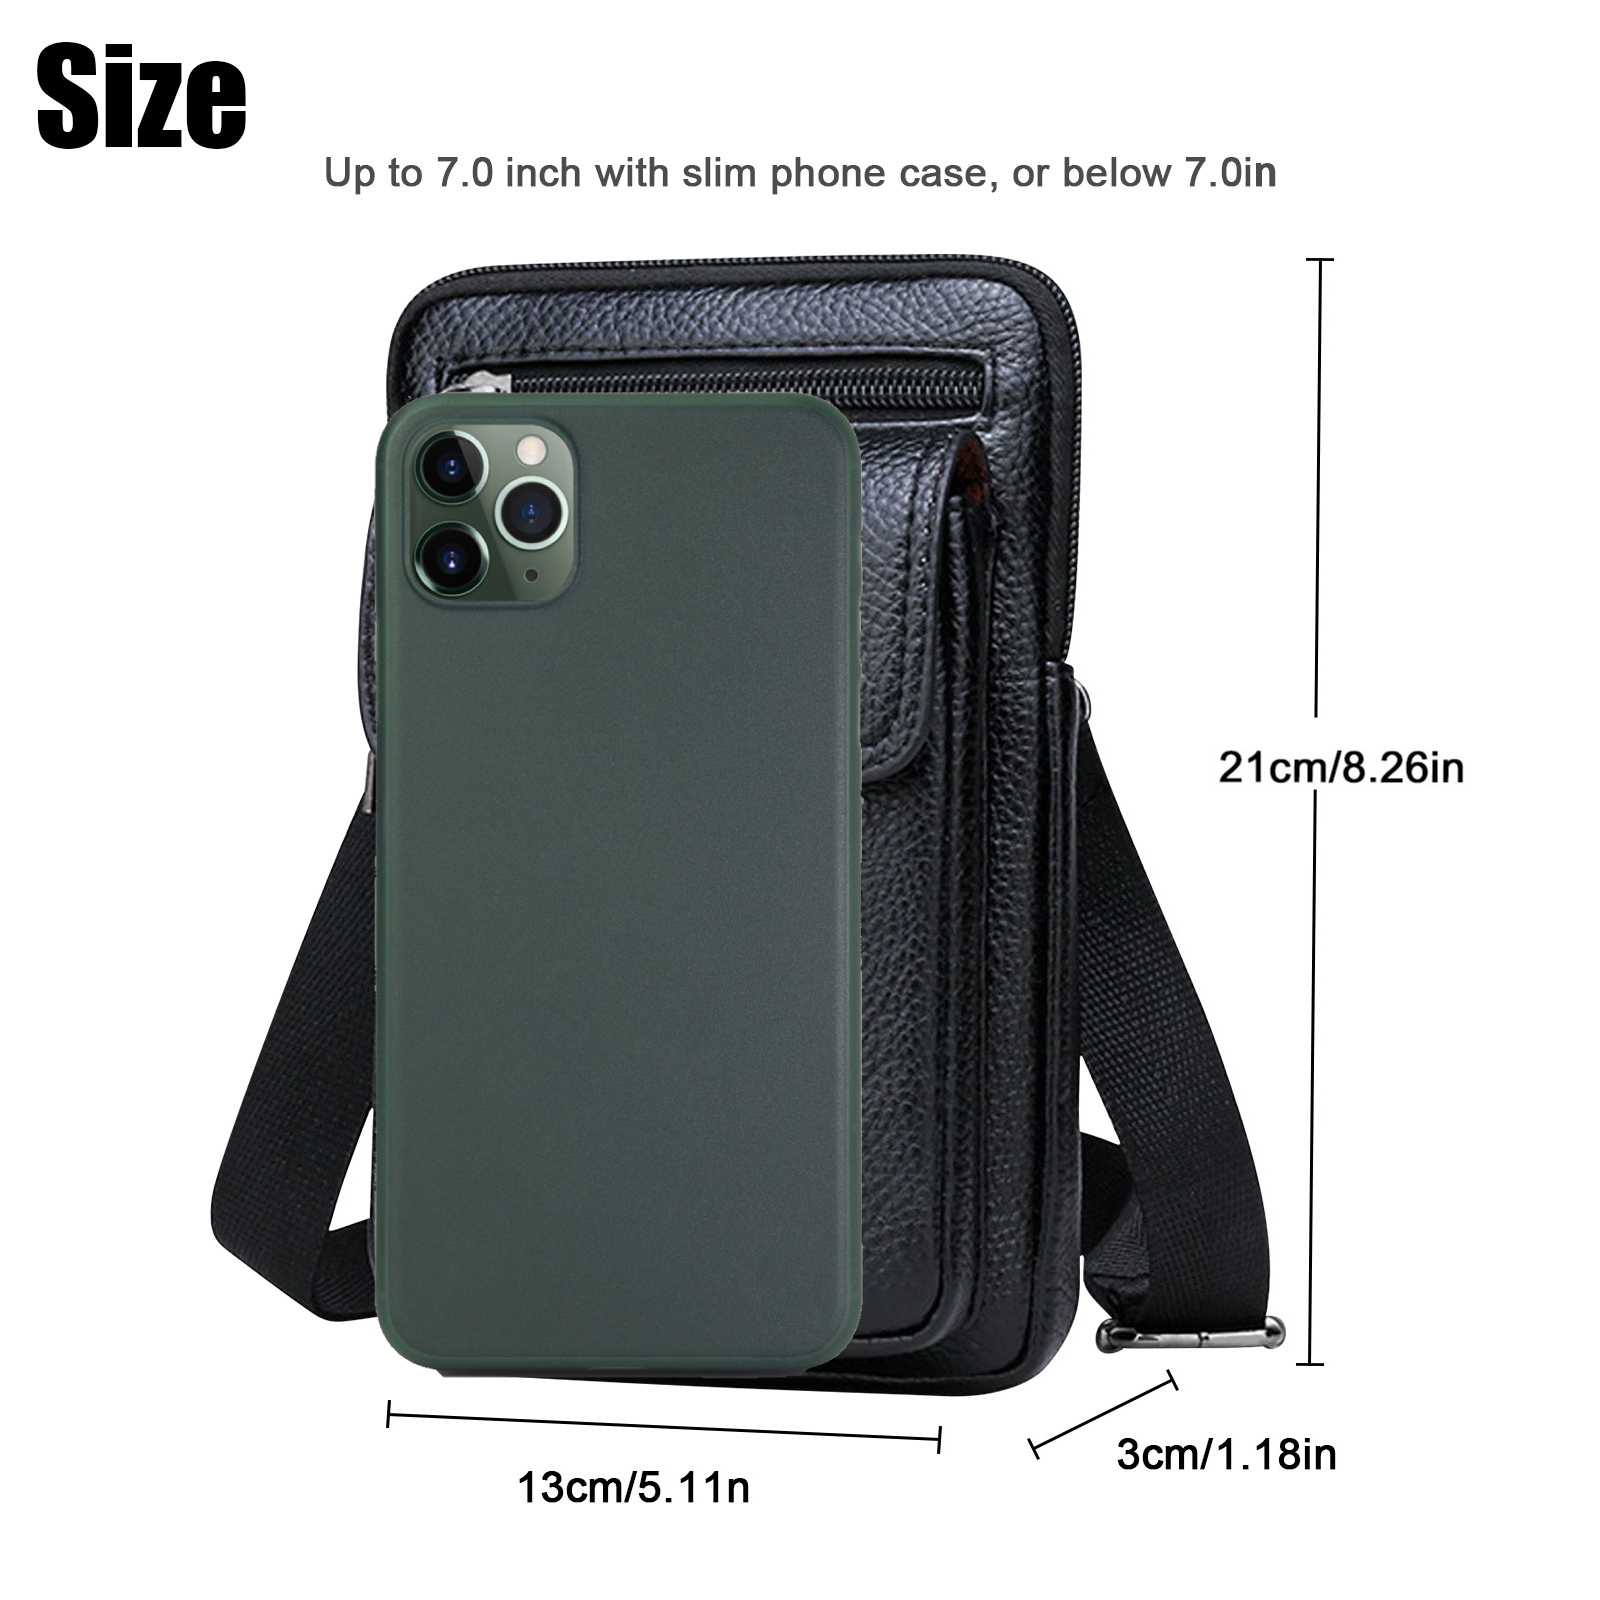 Cell Phone Bag, TSV Leather Cell Phone Purse for Men, Crossbody Cellphone Purse Bag Wallet Handbag with Adjustable Shoulder Strap Fit for iPhone 13 12 11 Pro, Galaxy - image 2 of 8